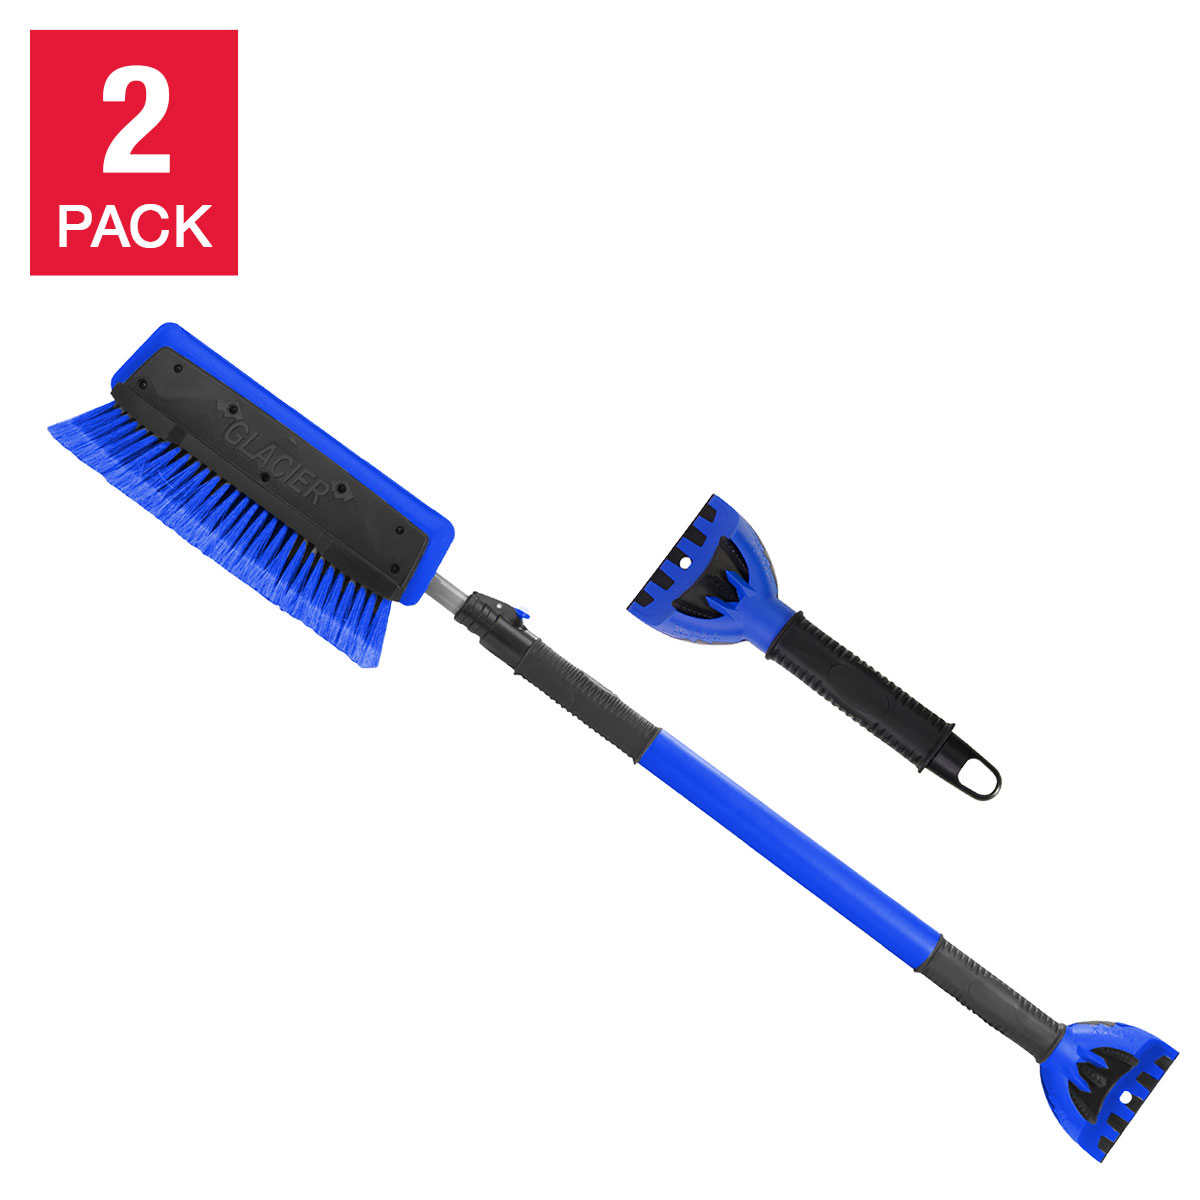 Top 6 Best Ice Scraper & Snow Brush For Car [ Reviews & Buying Guide ] 